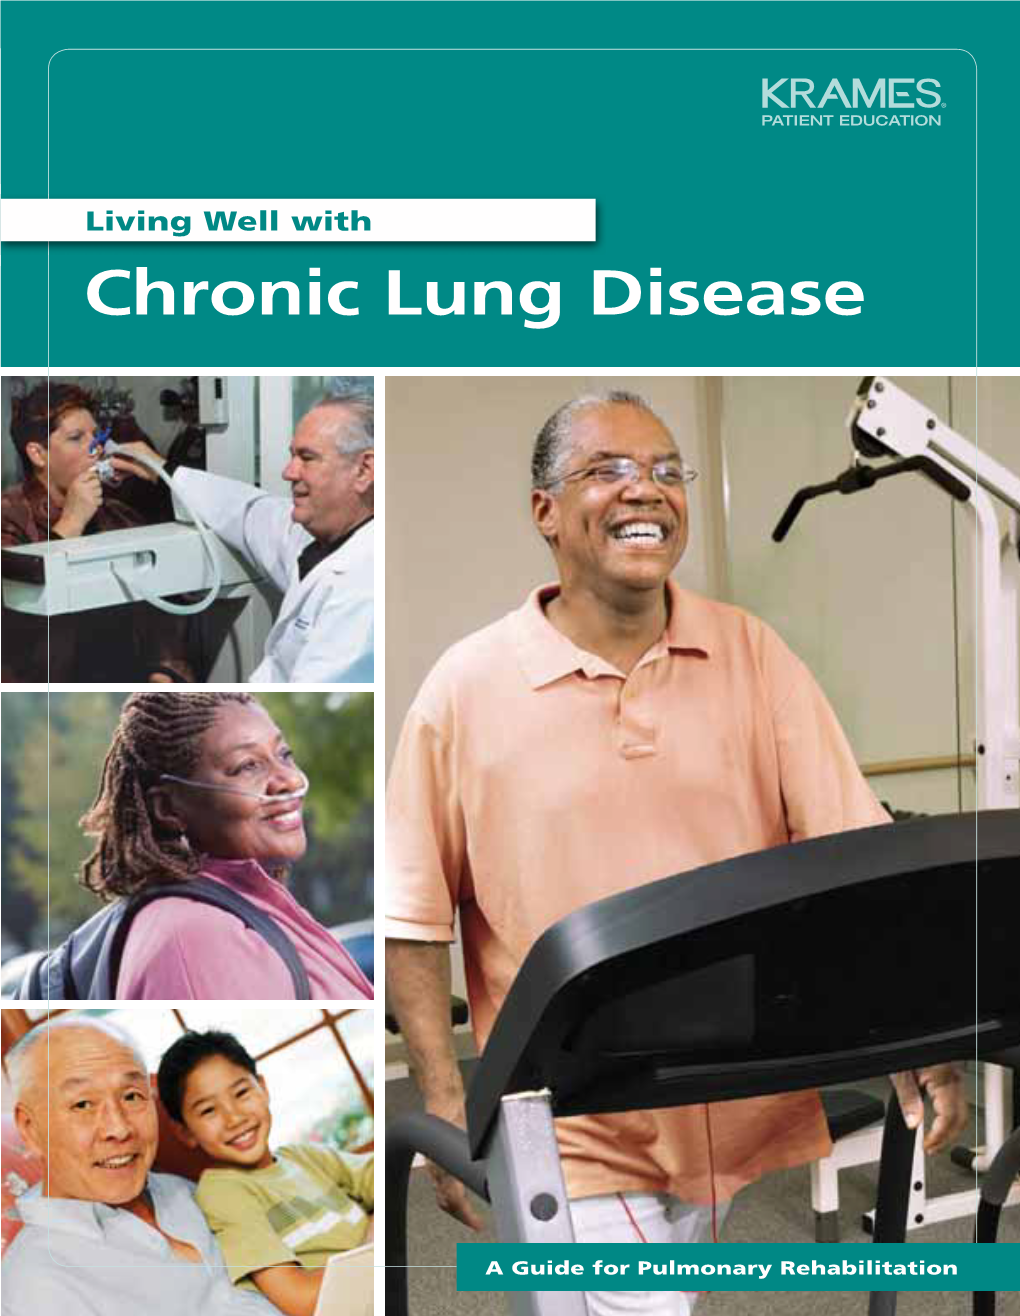 Chronic Lung Disease, It Can Be Hard to Do Things That Used to Be Easy